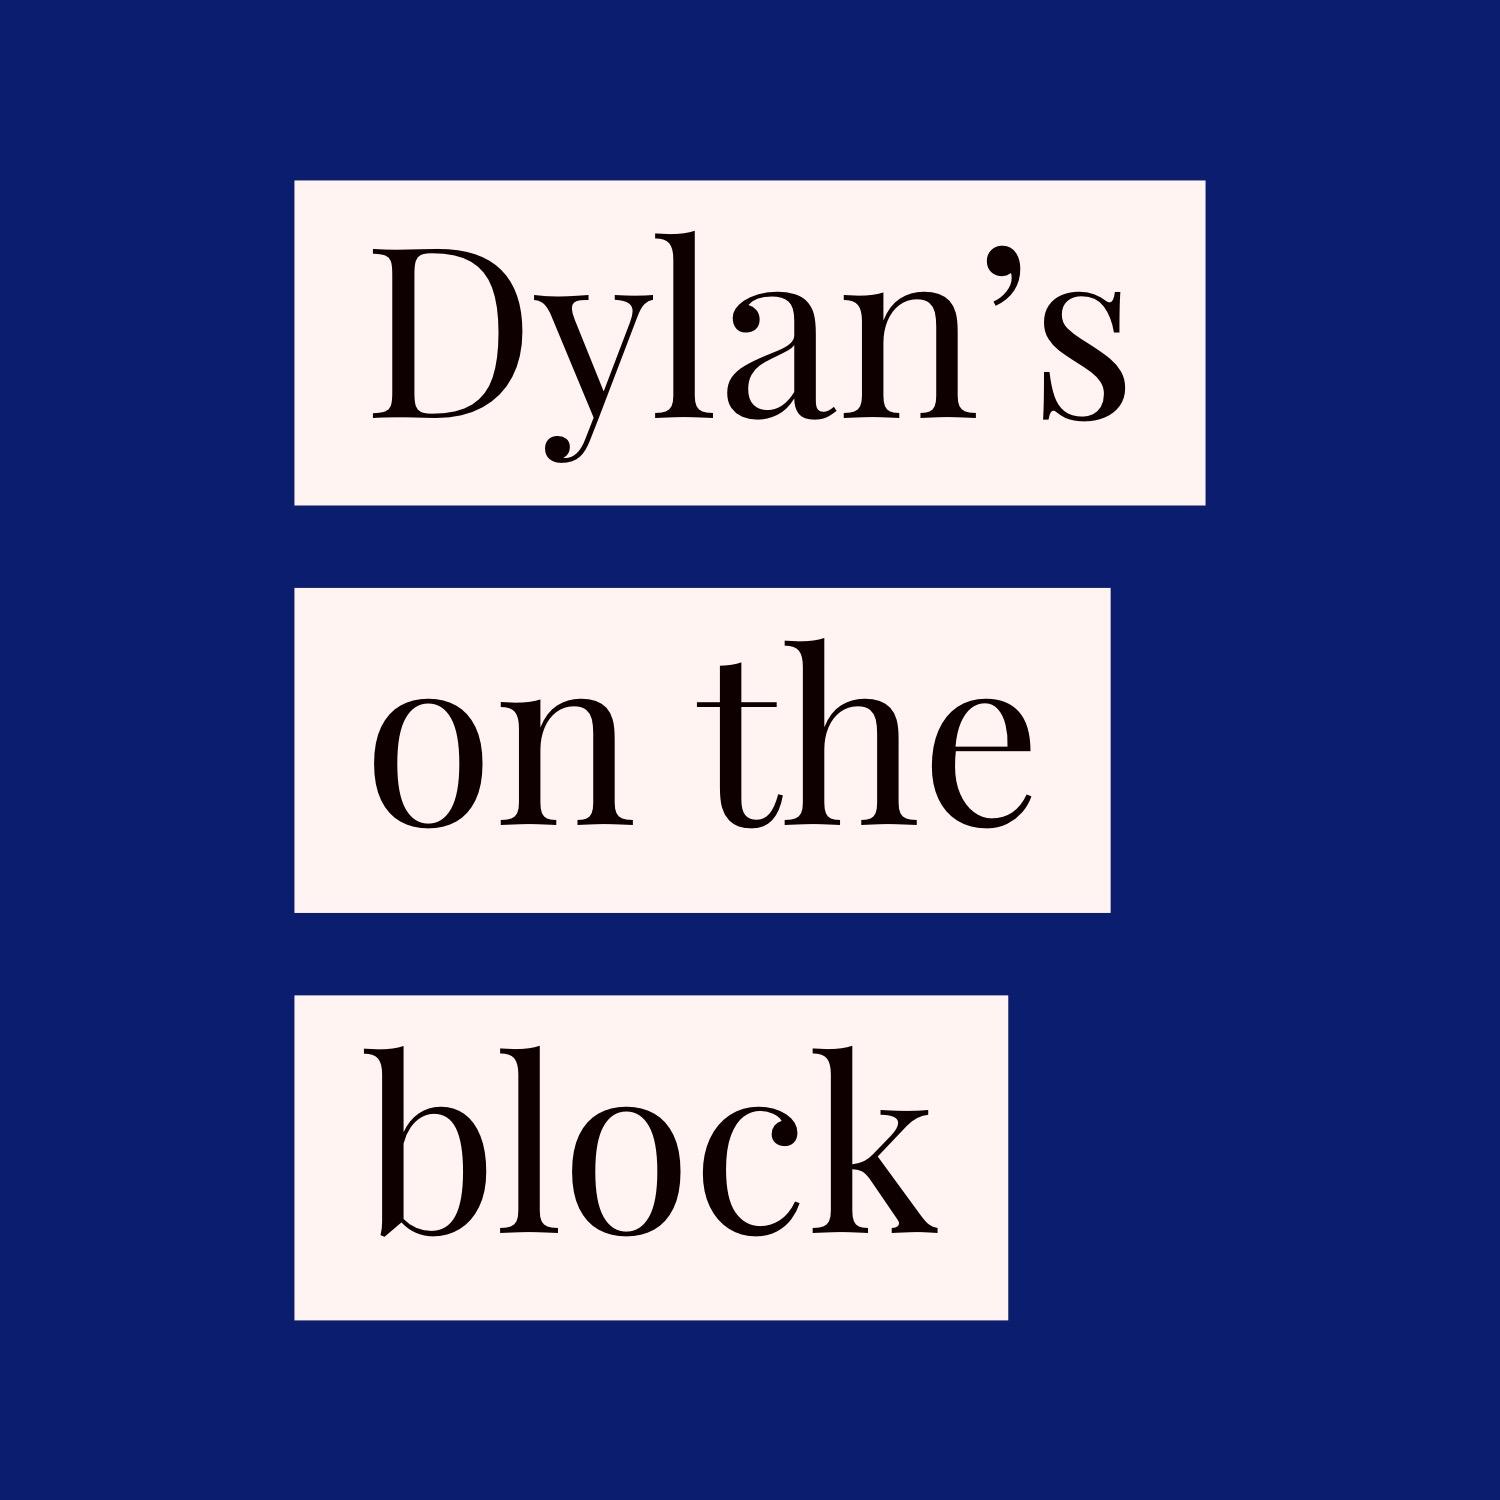 Dylan’s on the block